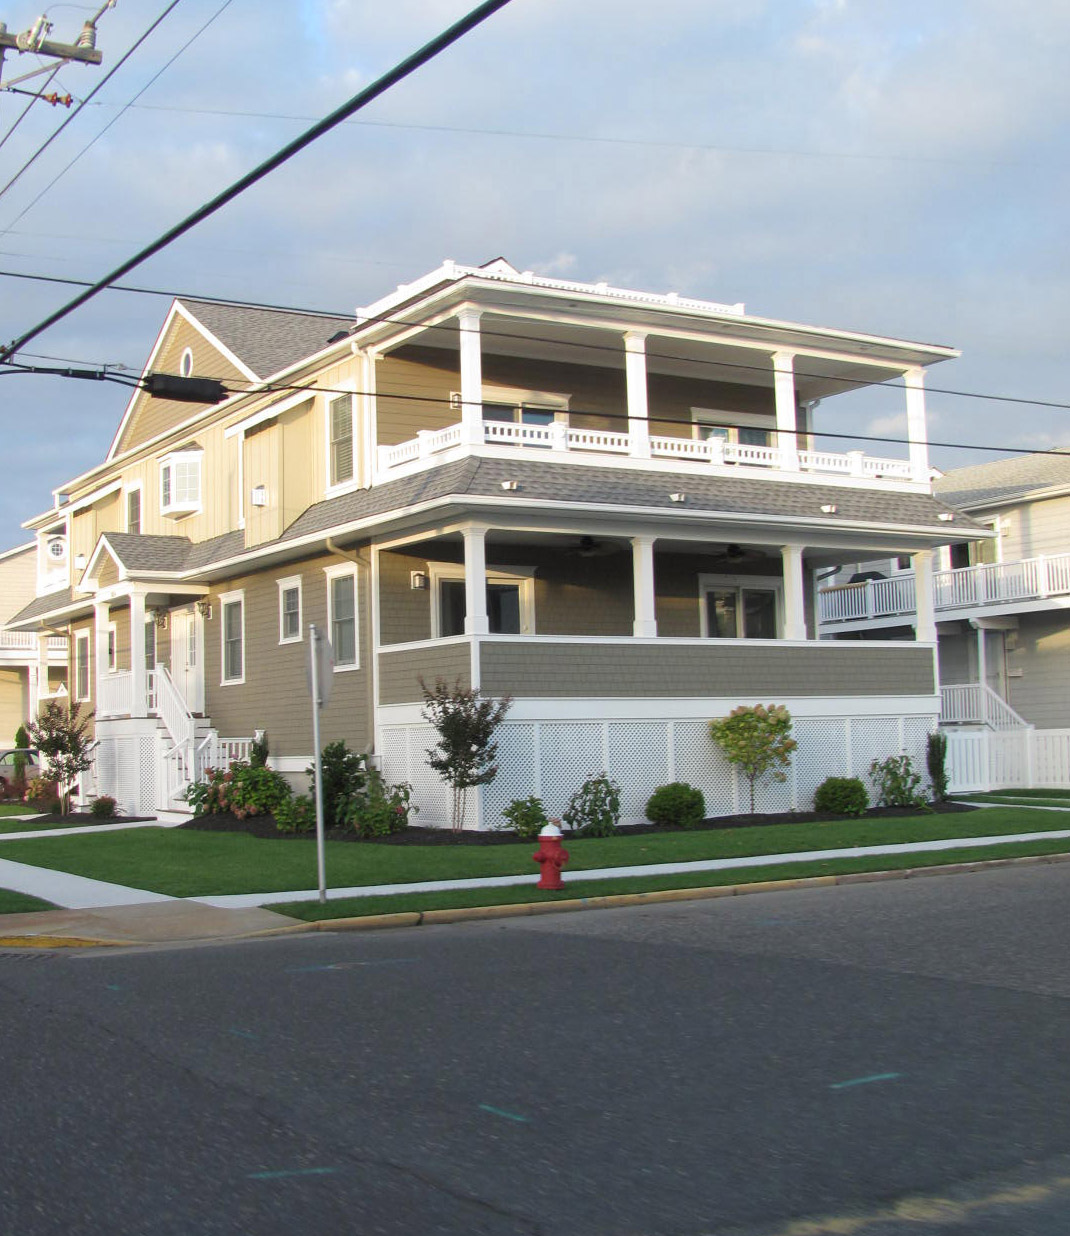 One of the homes in Avalon, NJ.jpg